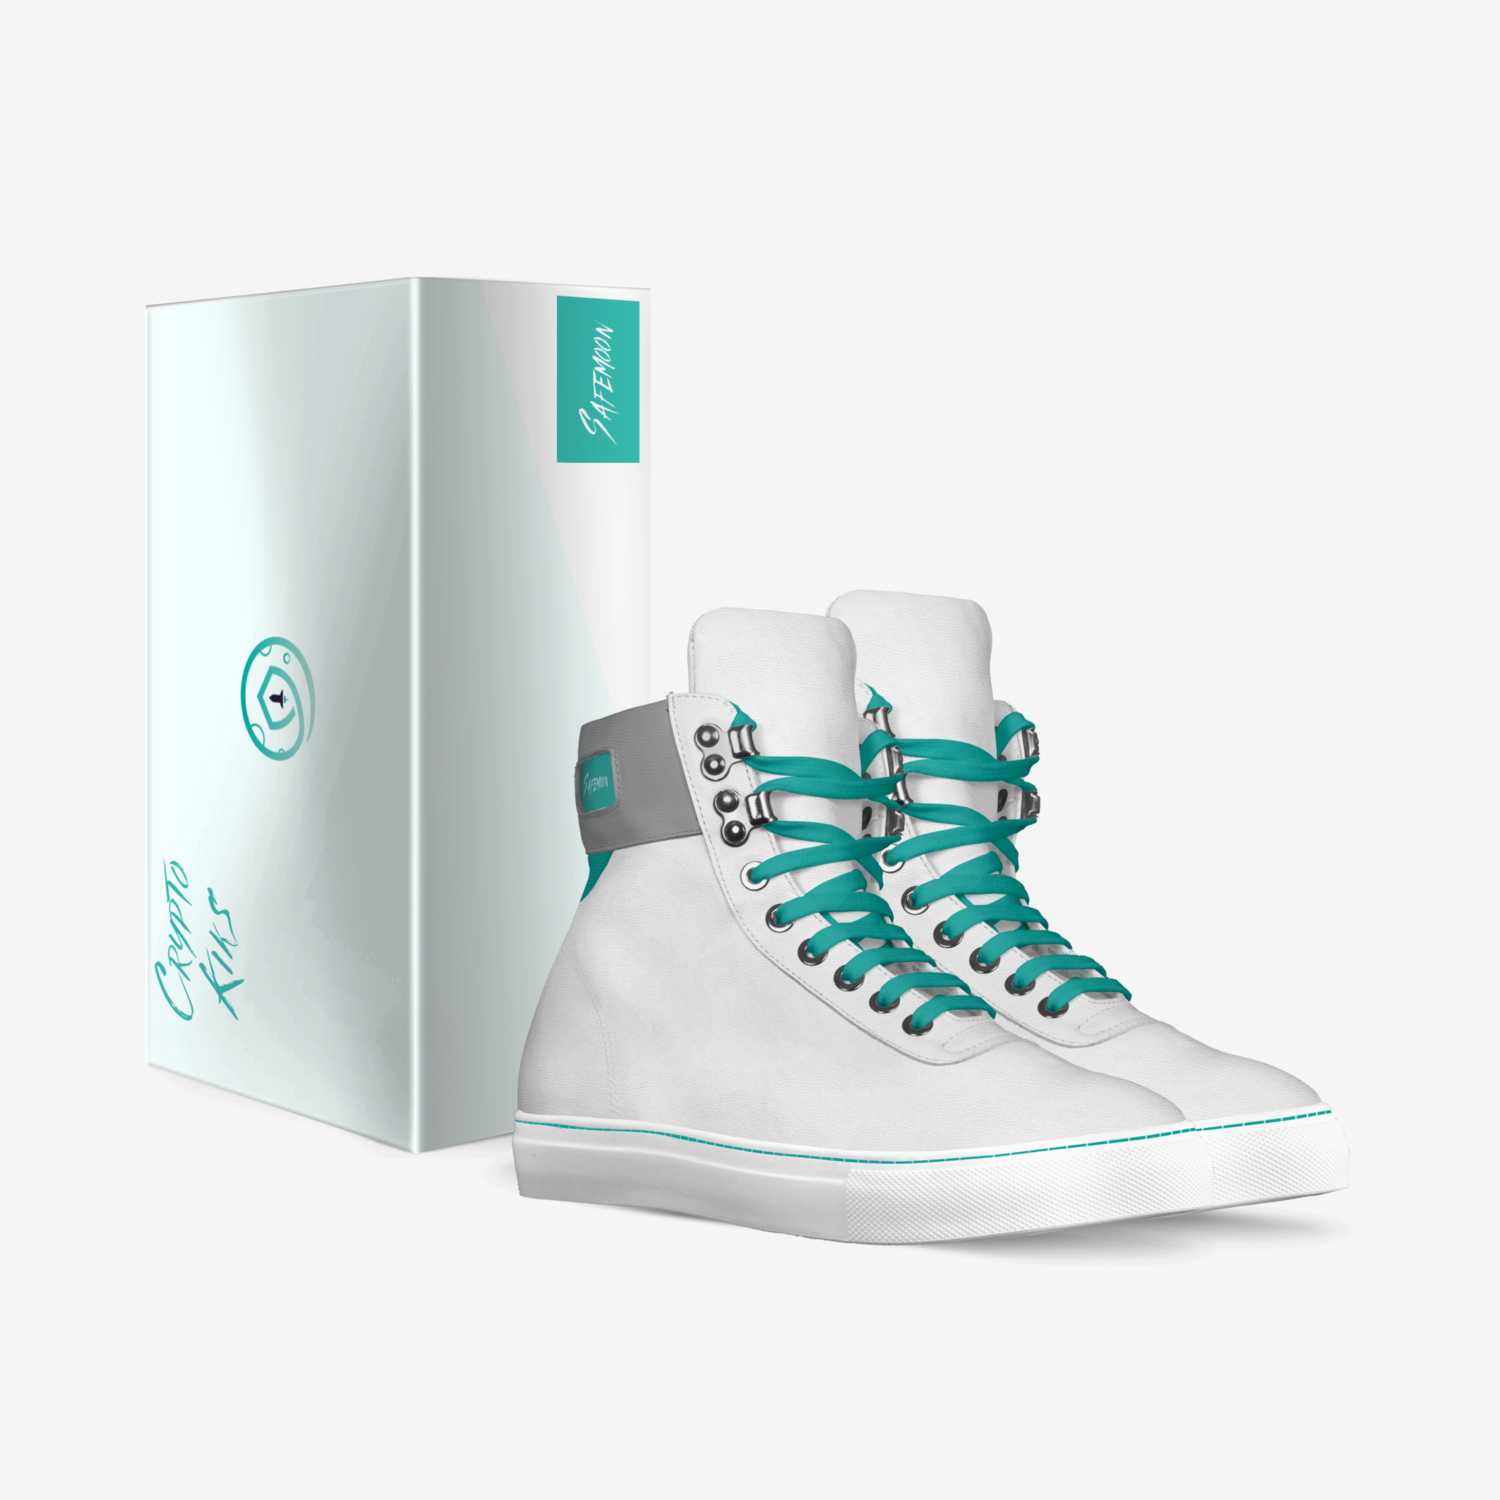 CryptoKiks custom made in Italy shoes by Buy Crypto Swag | Box view